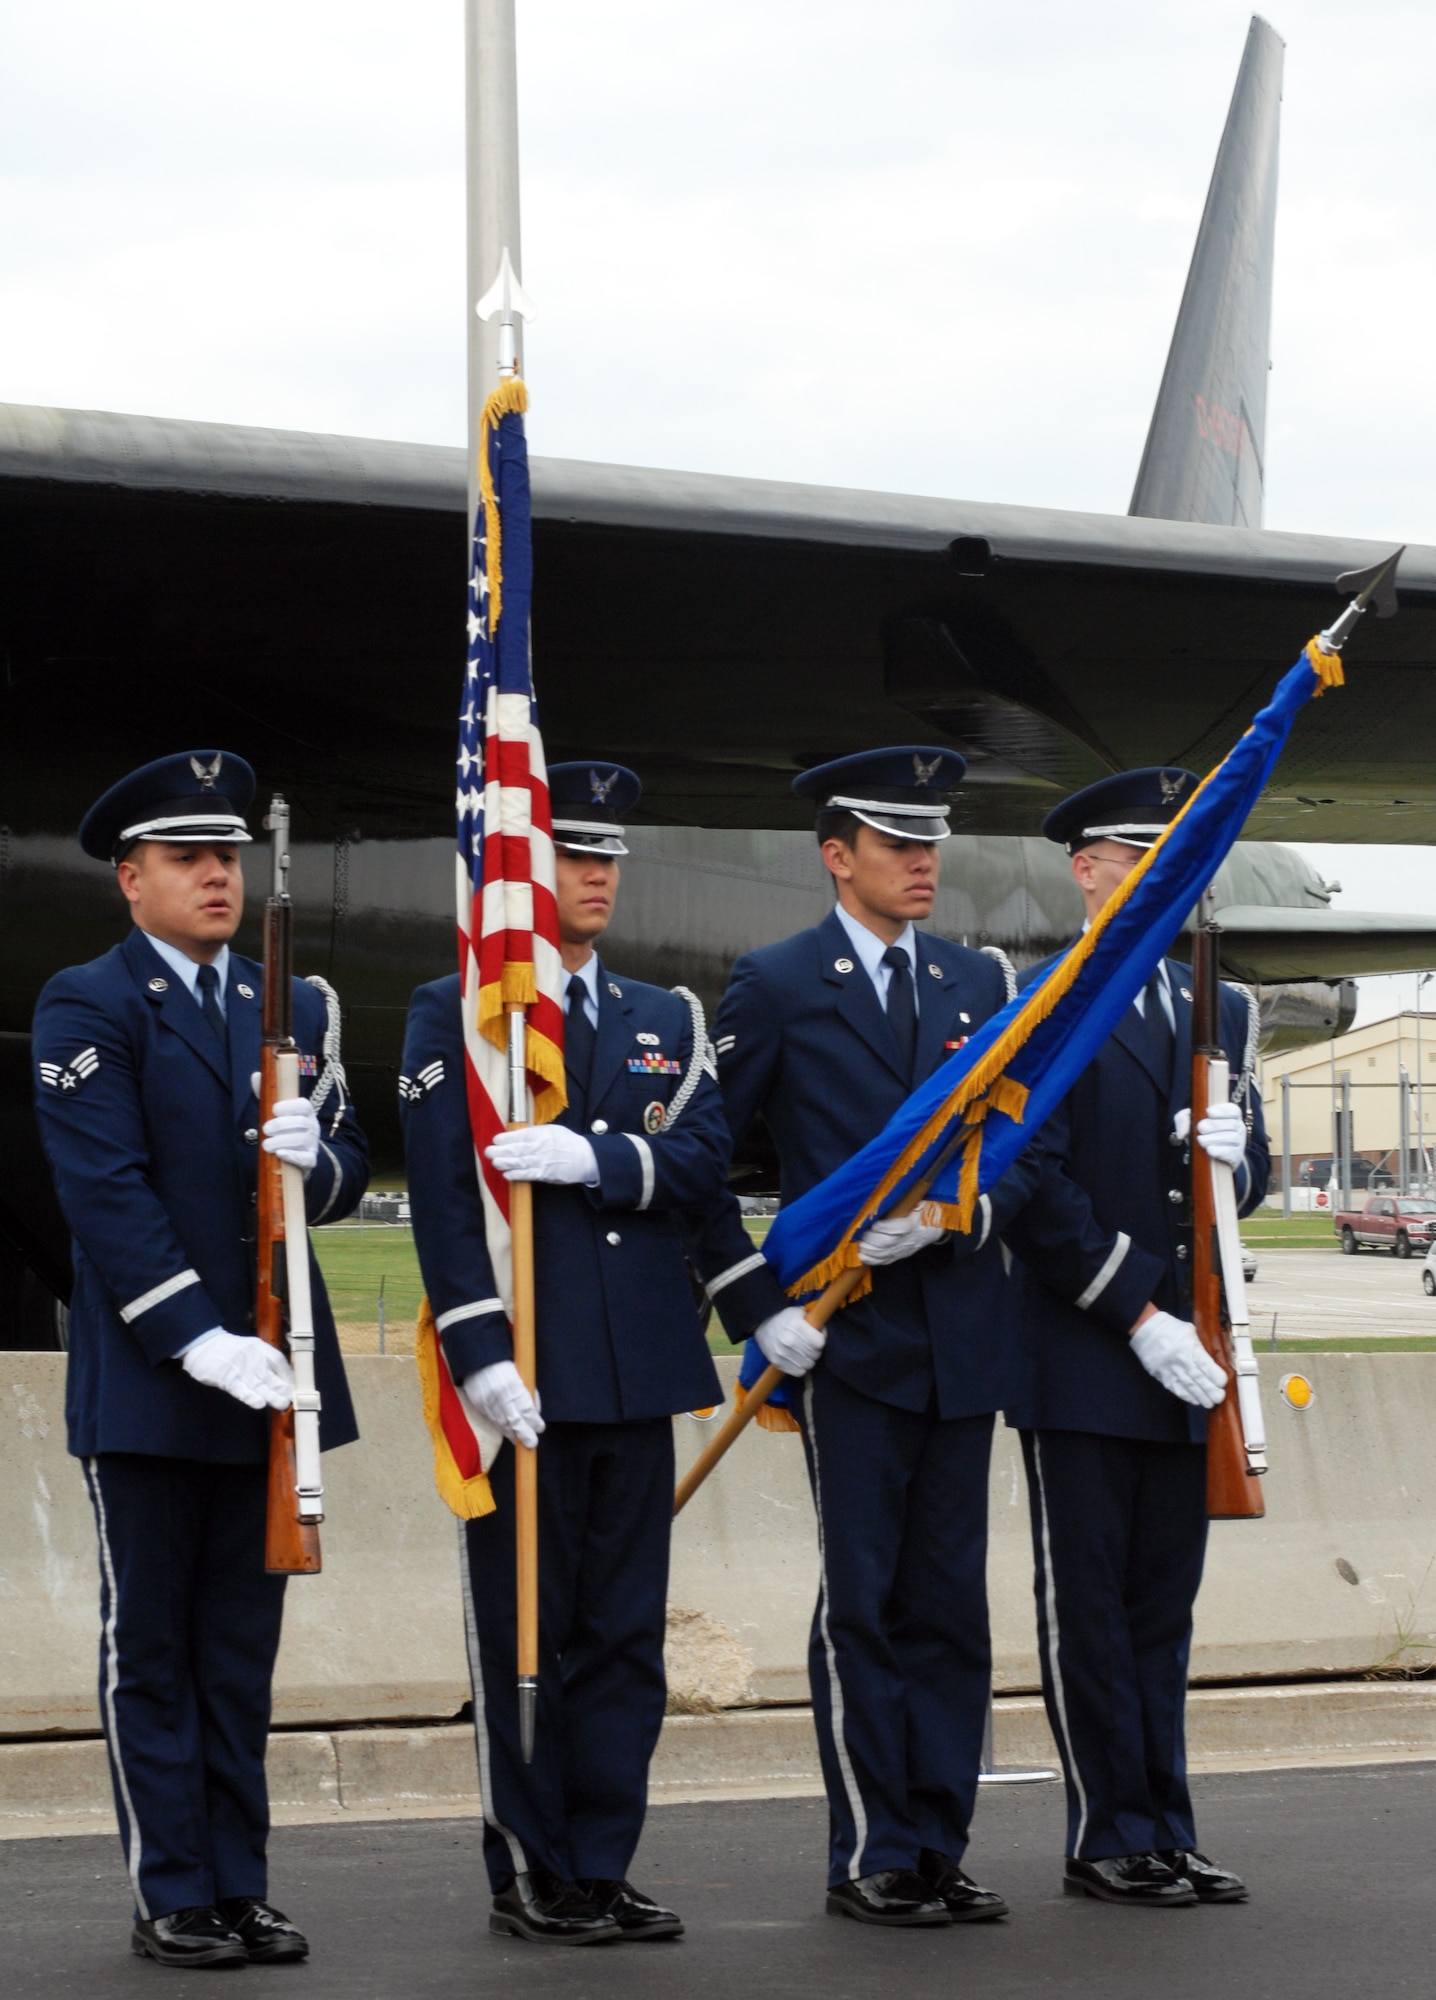 WHITEMAN AIR FORCE BASE, Mo. - Members of the Whiteman Honor Guard prepare to post the colors during the B-52 static display rededication ceremony Nov. 10. the B-52 was repainted and dedicated to Capt. Robert Morris, a B-52 pilot during the Linebacker II missions. Captain Morris and his crew shot down after their mission. (U.S. Air Force photo/Airman 1st Class Carlin Leslie) 